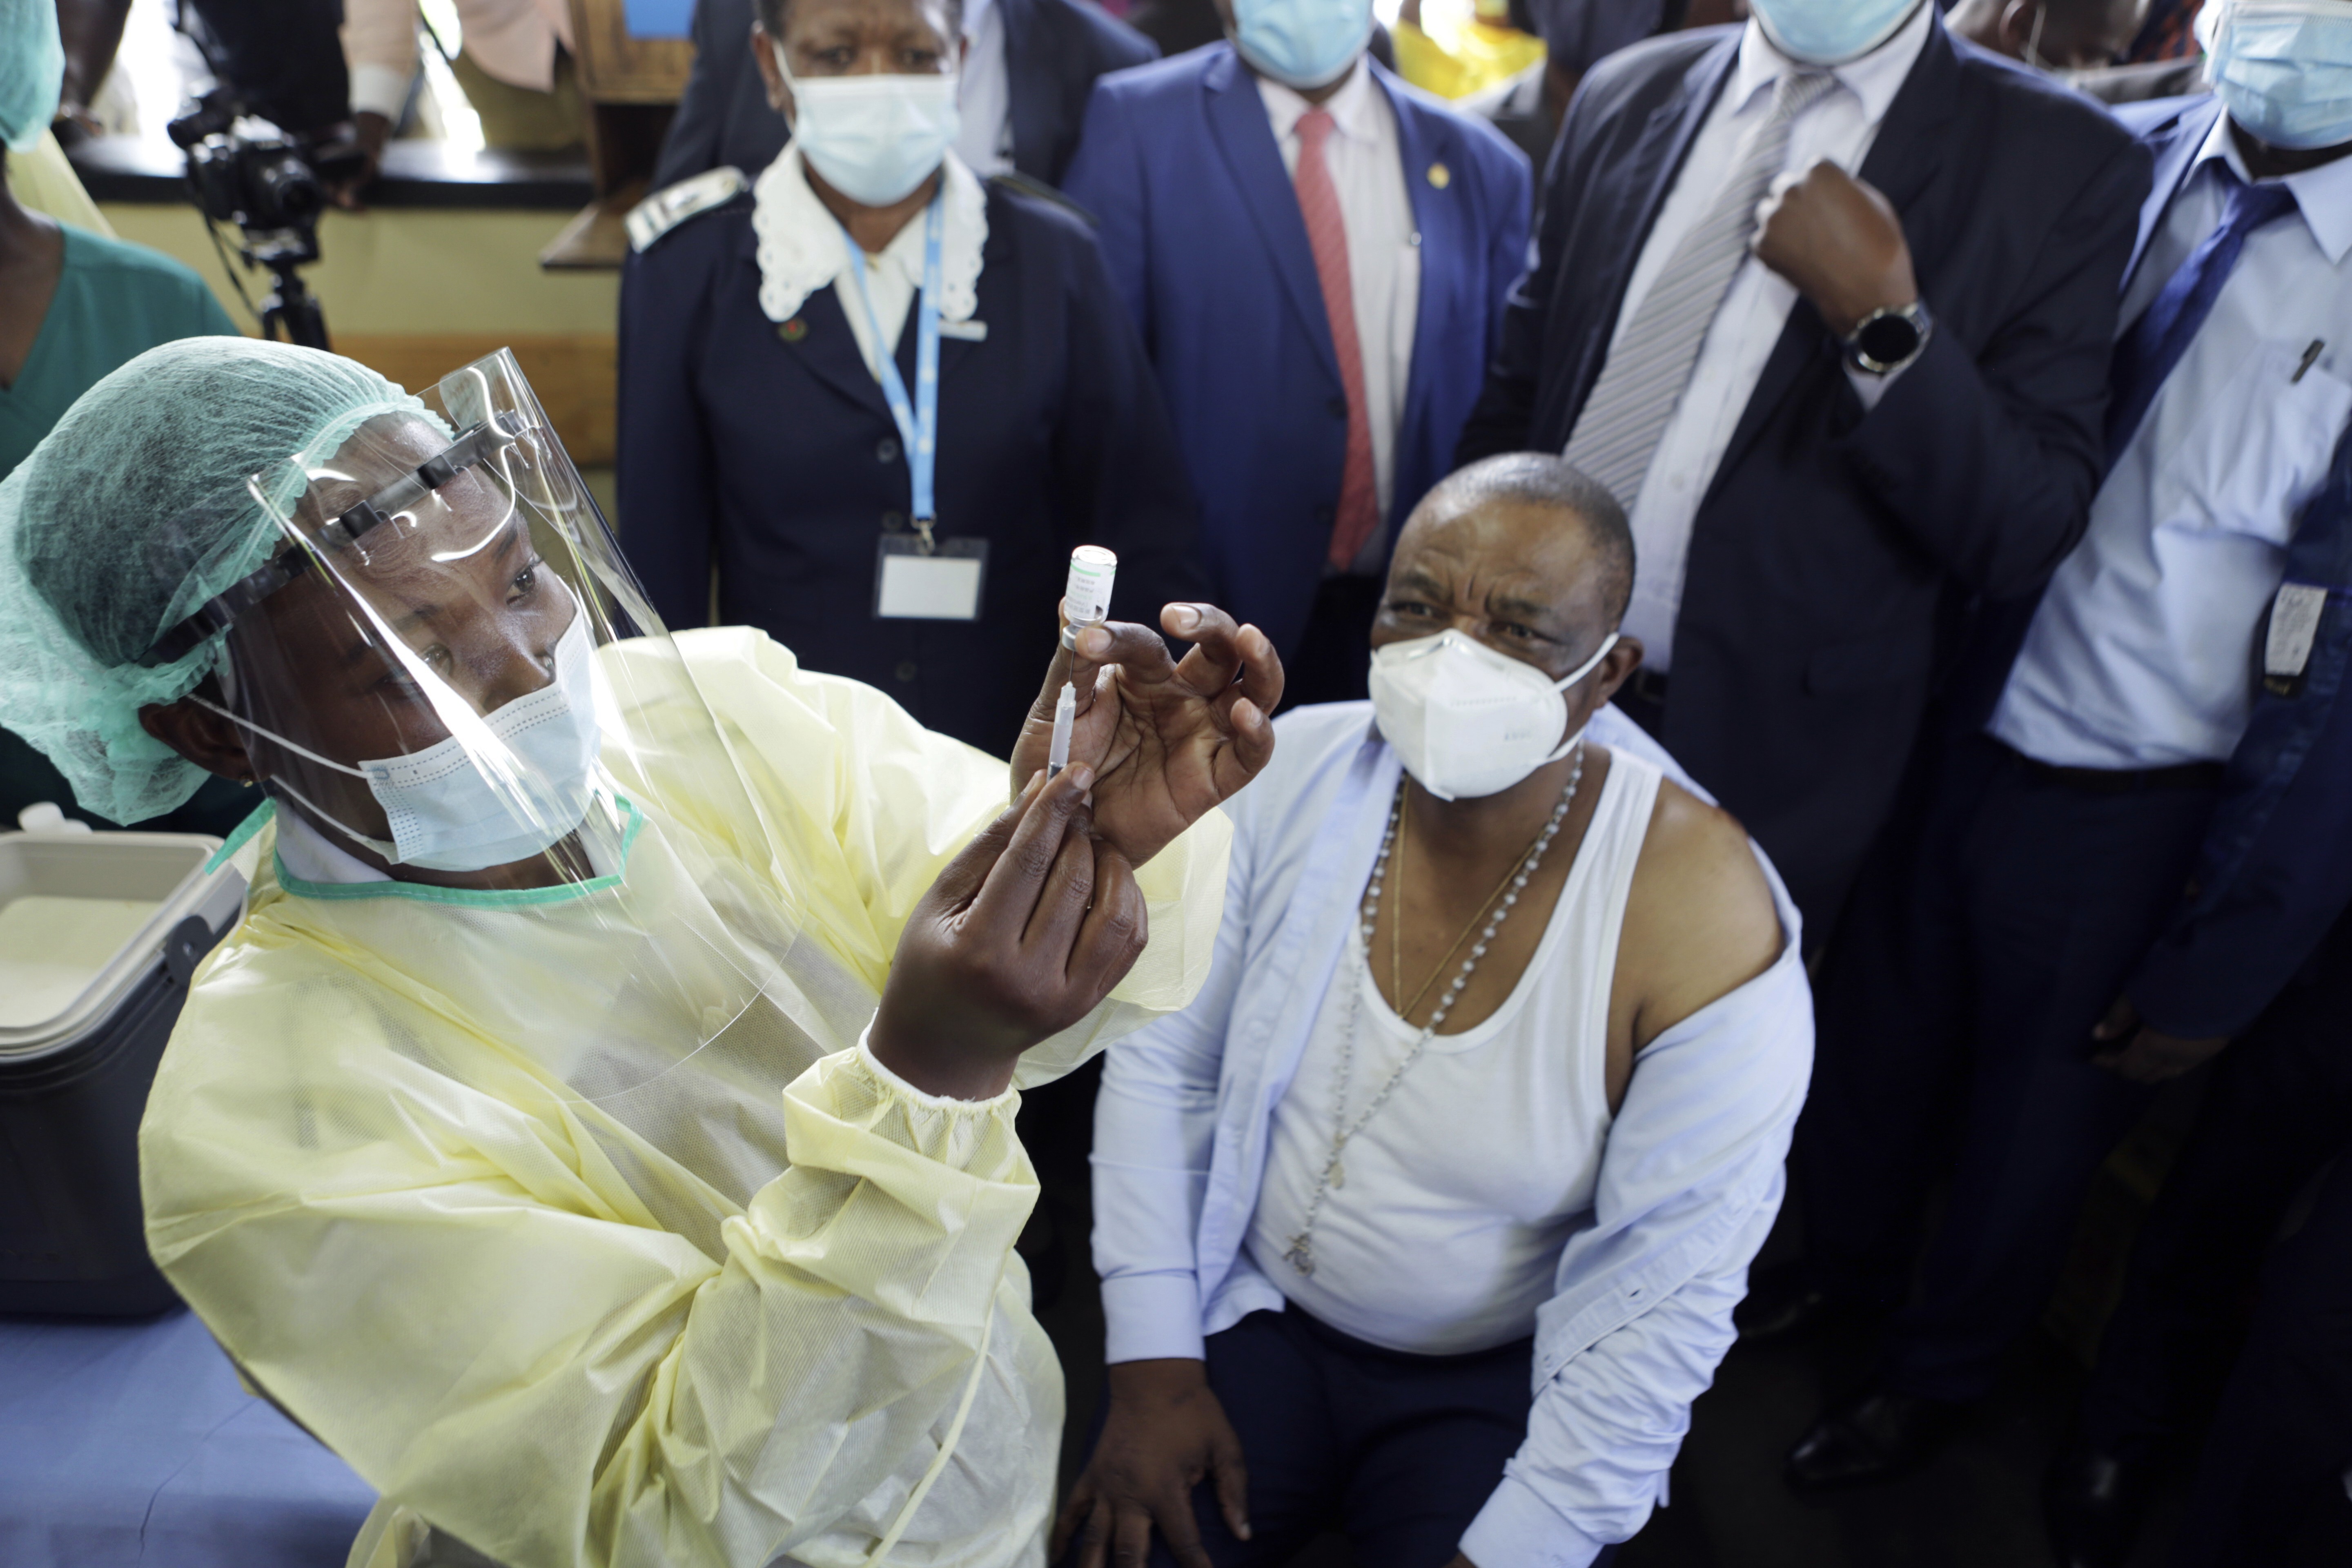 A nurse prepares to give a shot of the Sinopharm Covid-19 vaccine to Zimbabwean vice-president Constantino Chiwenga at a hospital in Harare on February 18, after Zimbabwe received 200,000 doses of the vaccine donated by China. Photo: AP